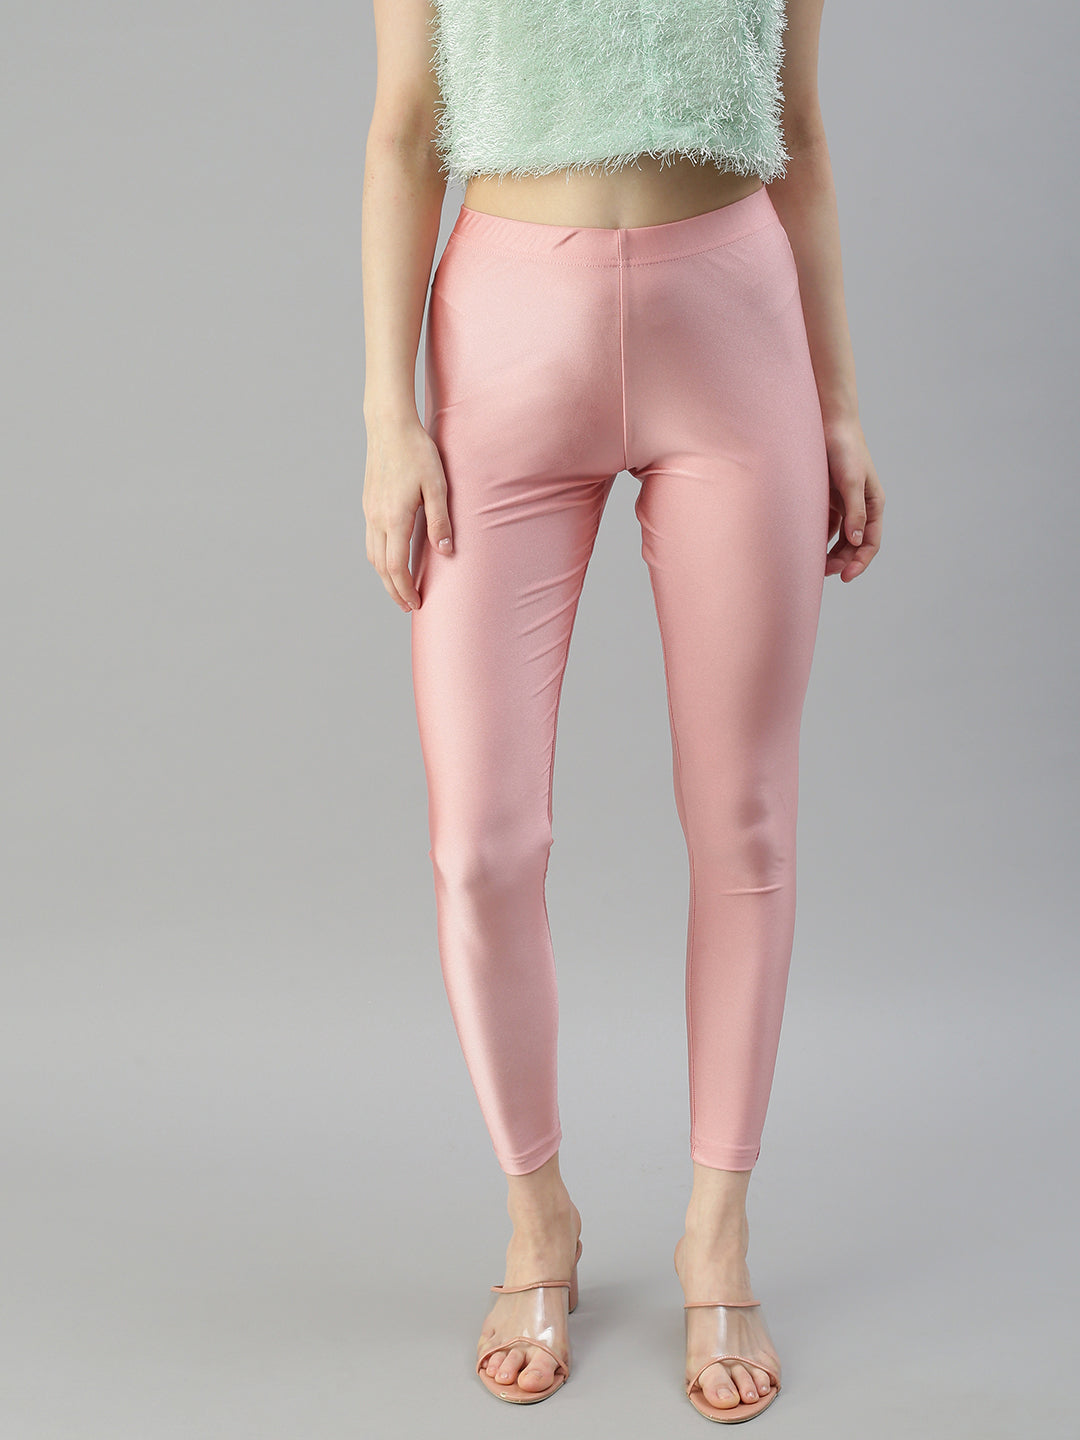 GO COLORS Copper Shimmer Legging in Chennai at best price by Pothys  Boutique - Justdial